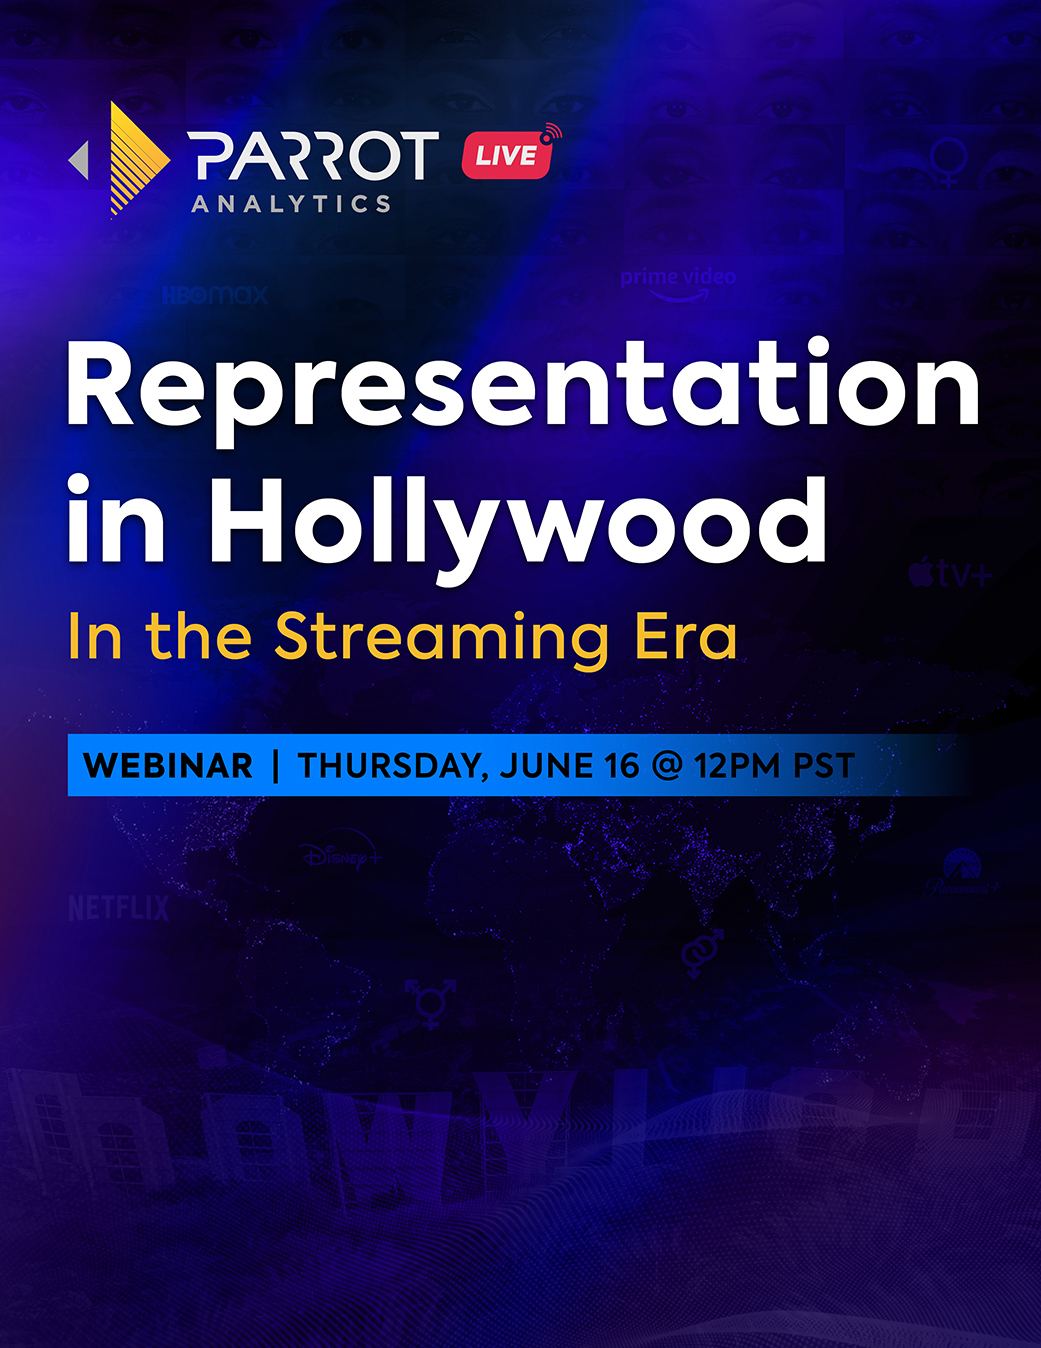 Parrot Analytics LIVE Representation in Hollywood